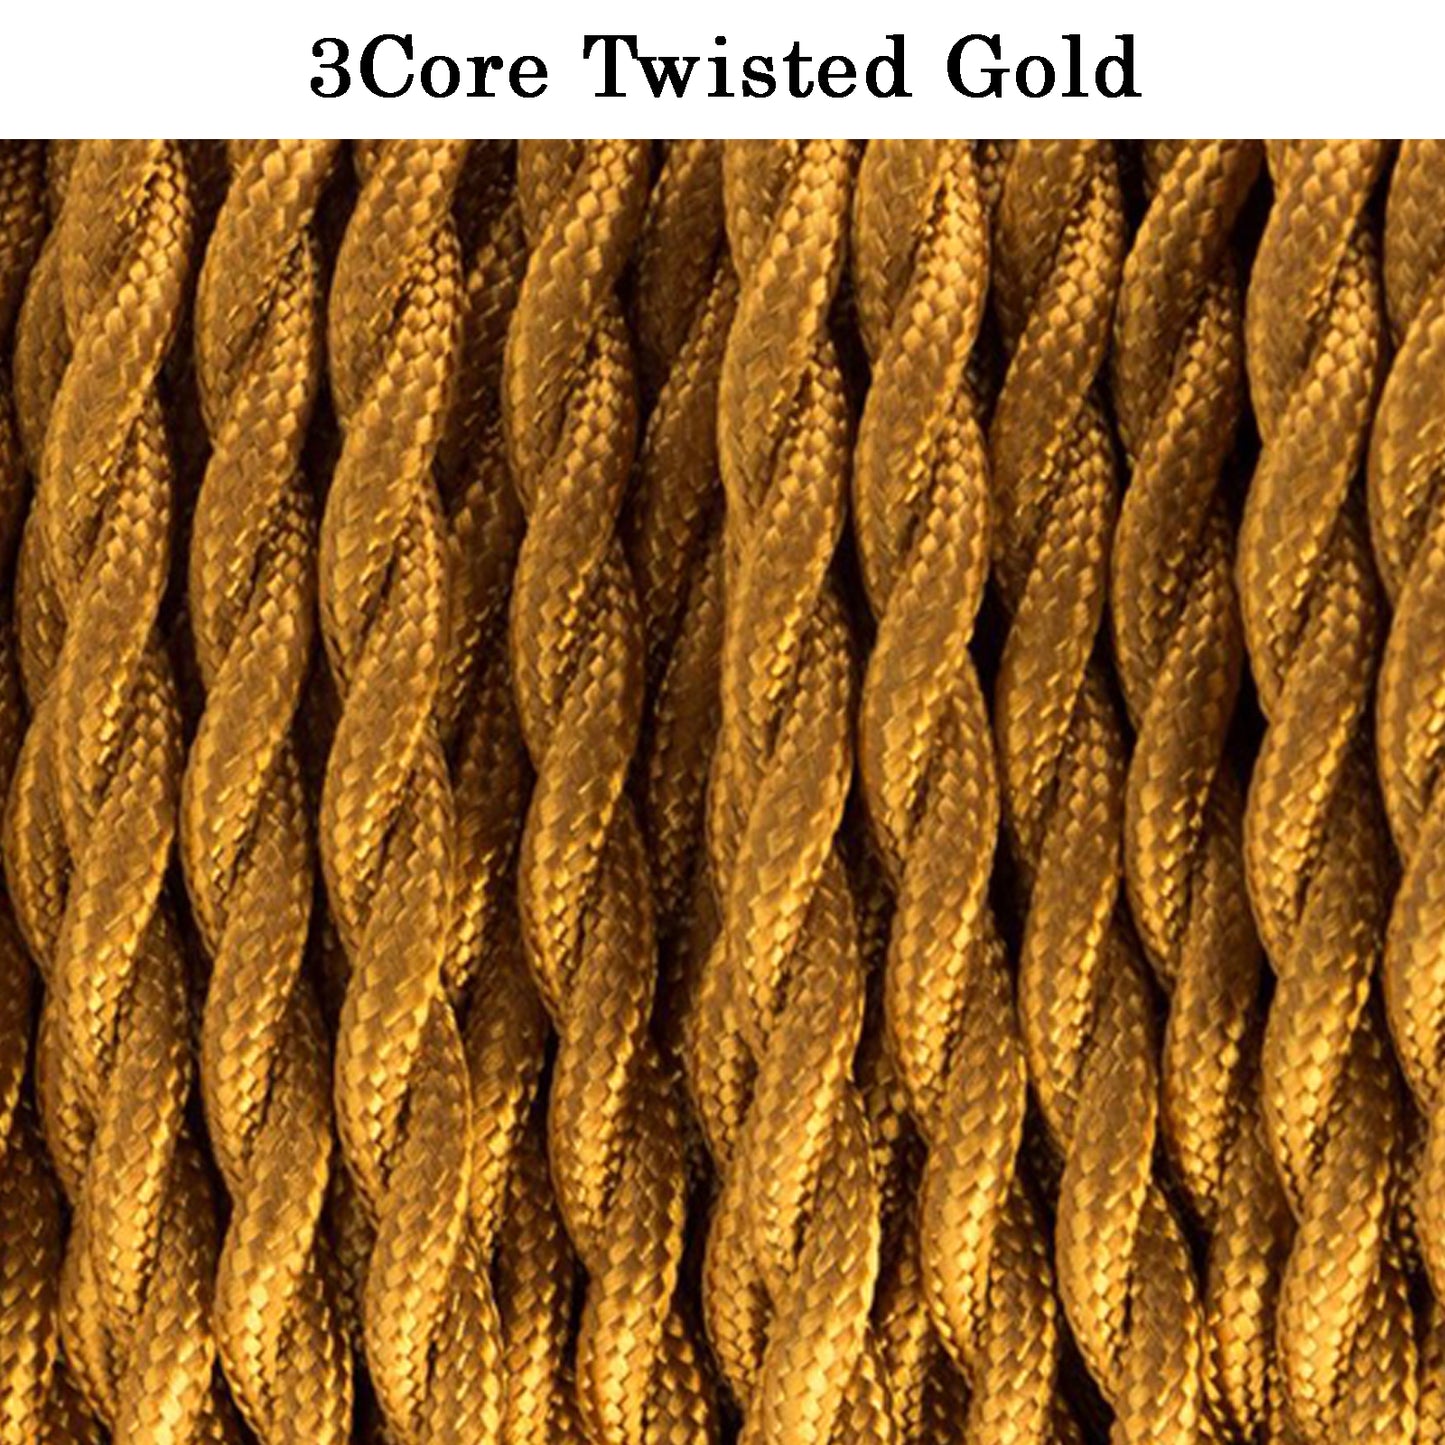 18 Gauge 3 Conductor Twisted Cloth Covered Wire Braided Light Cord Gold